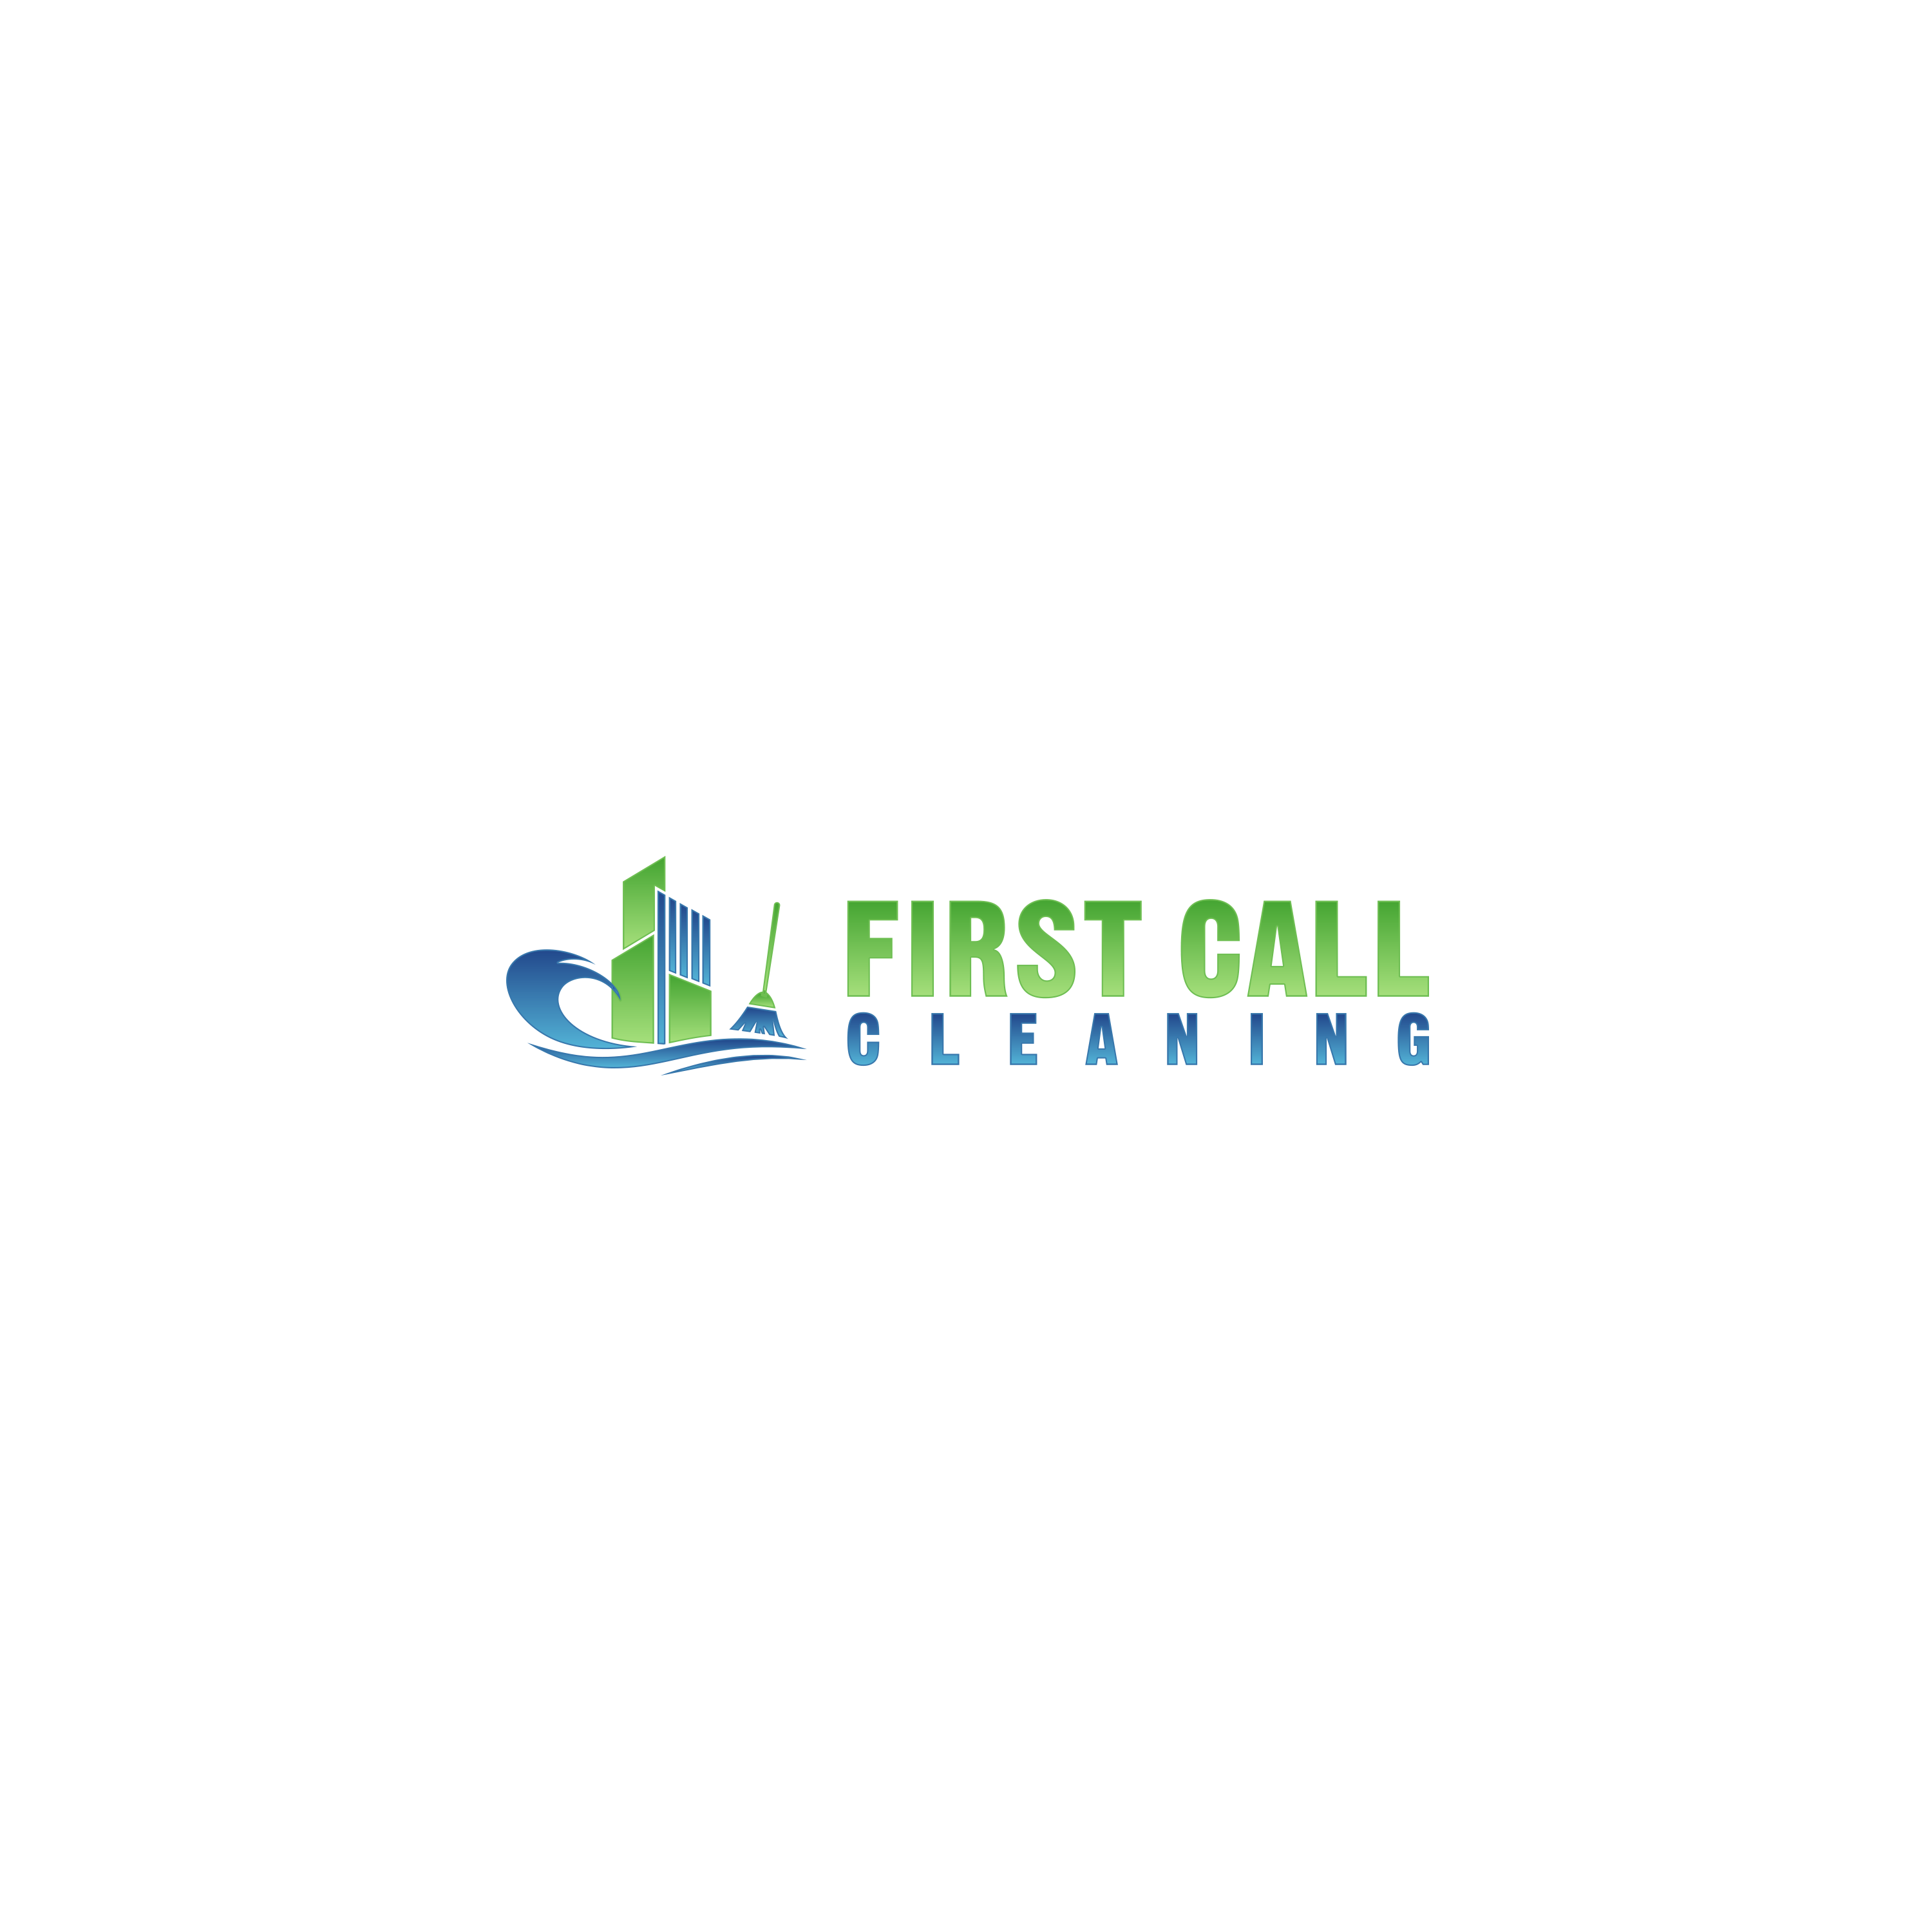 First Call Cleaning Design #3